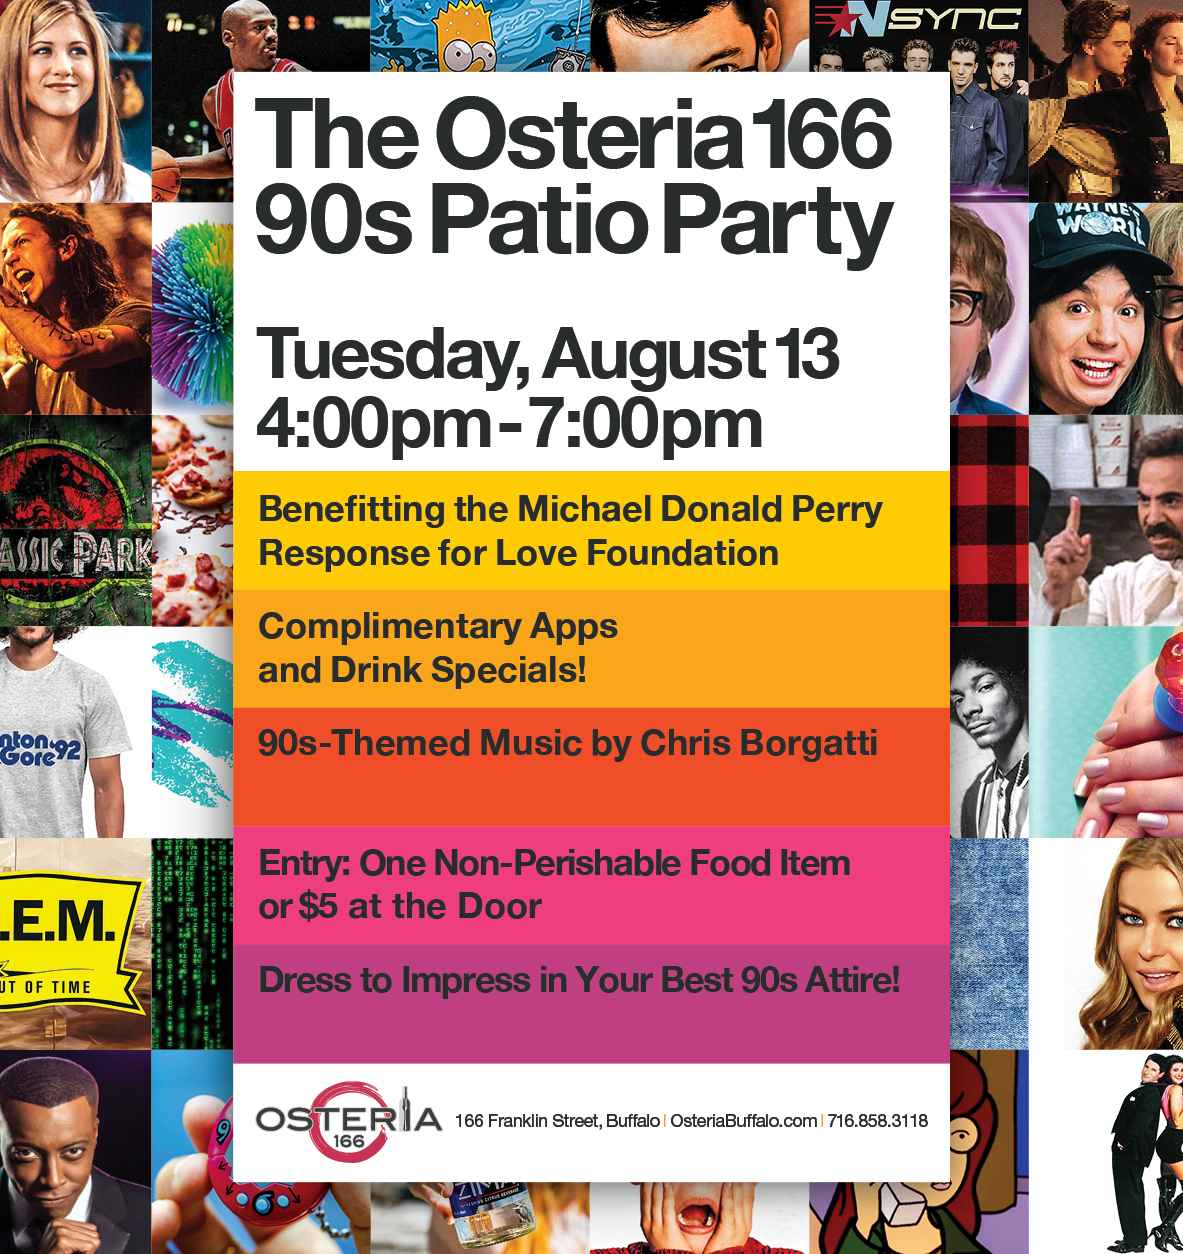 The Osteria 166 90s Patio Party